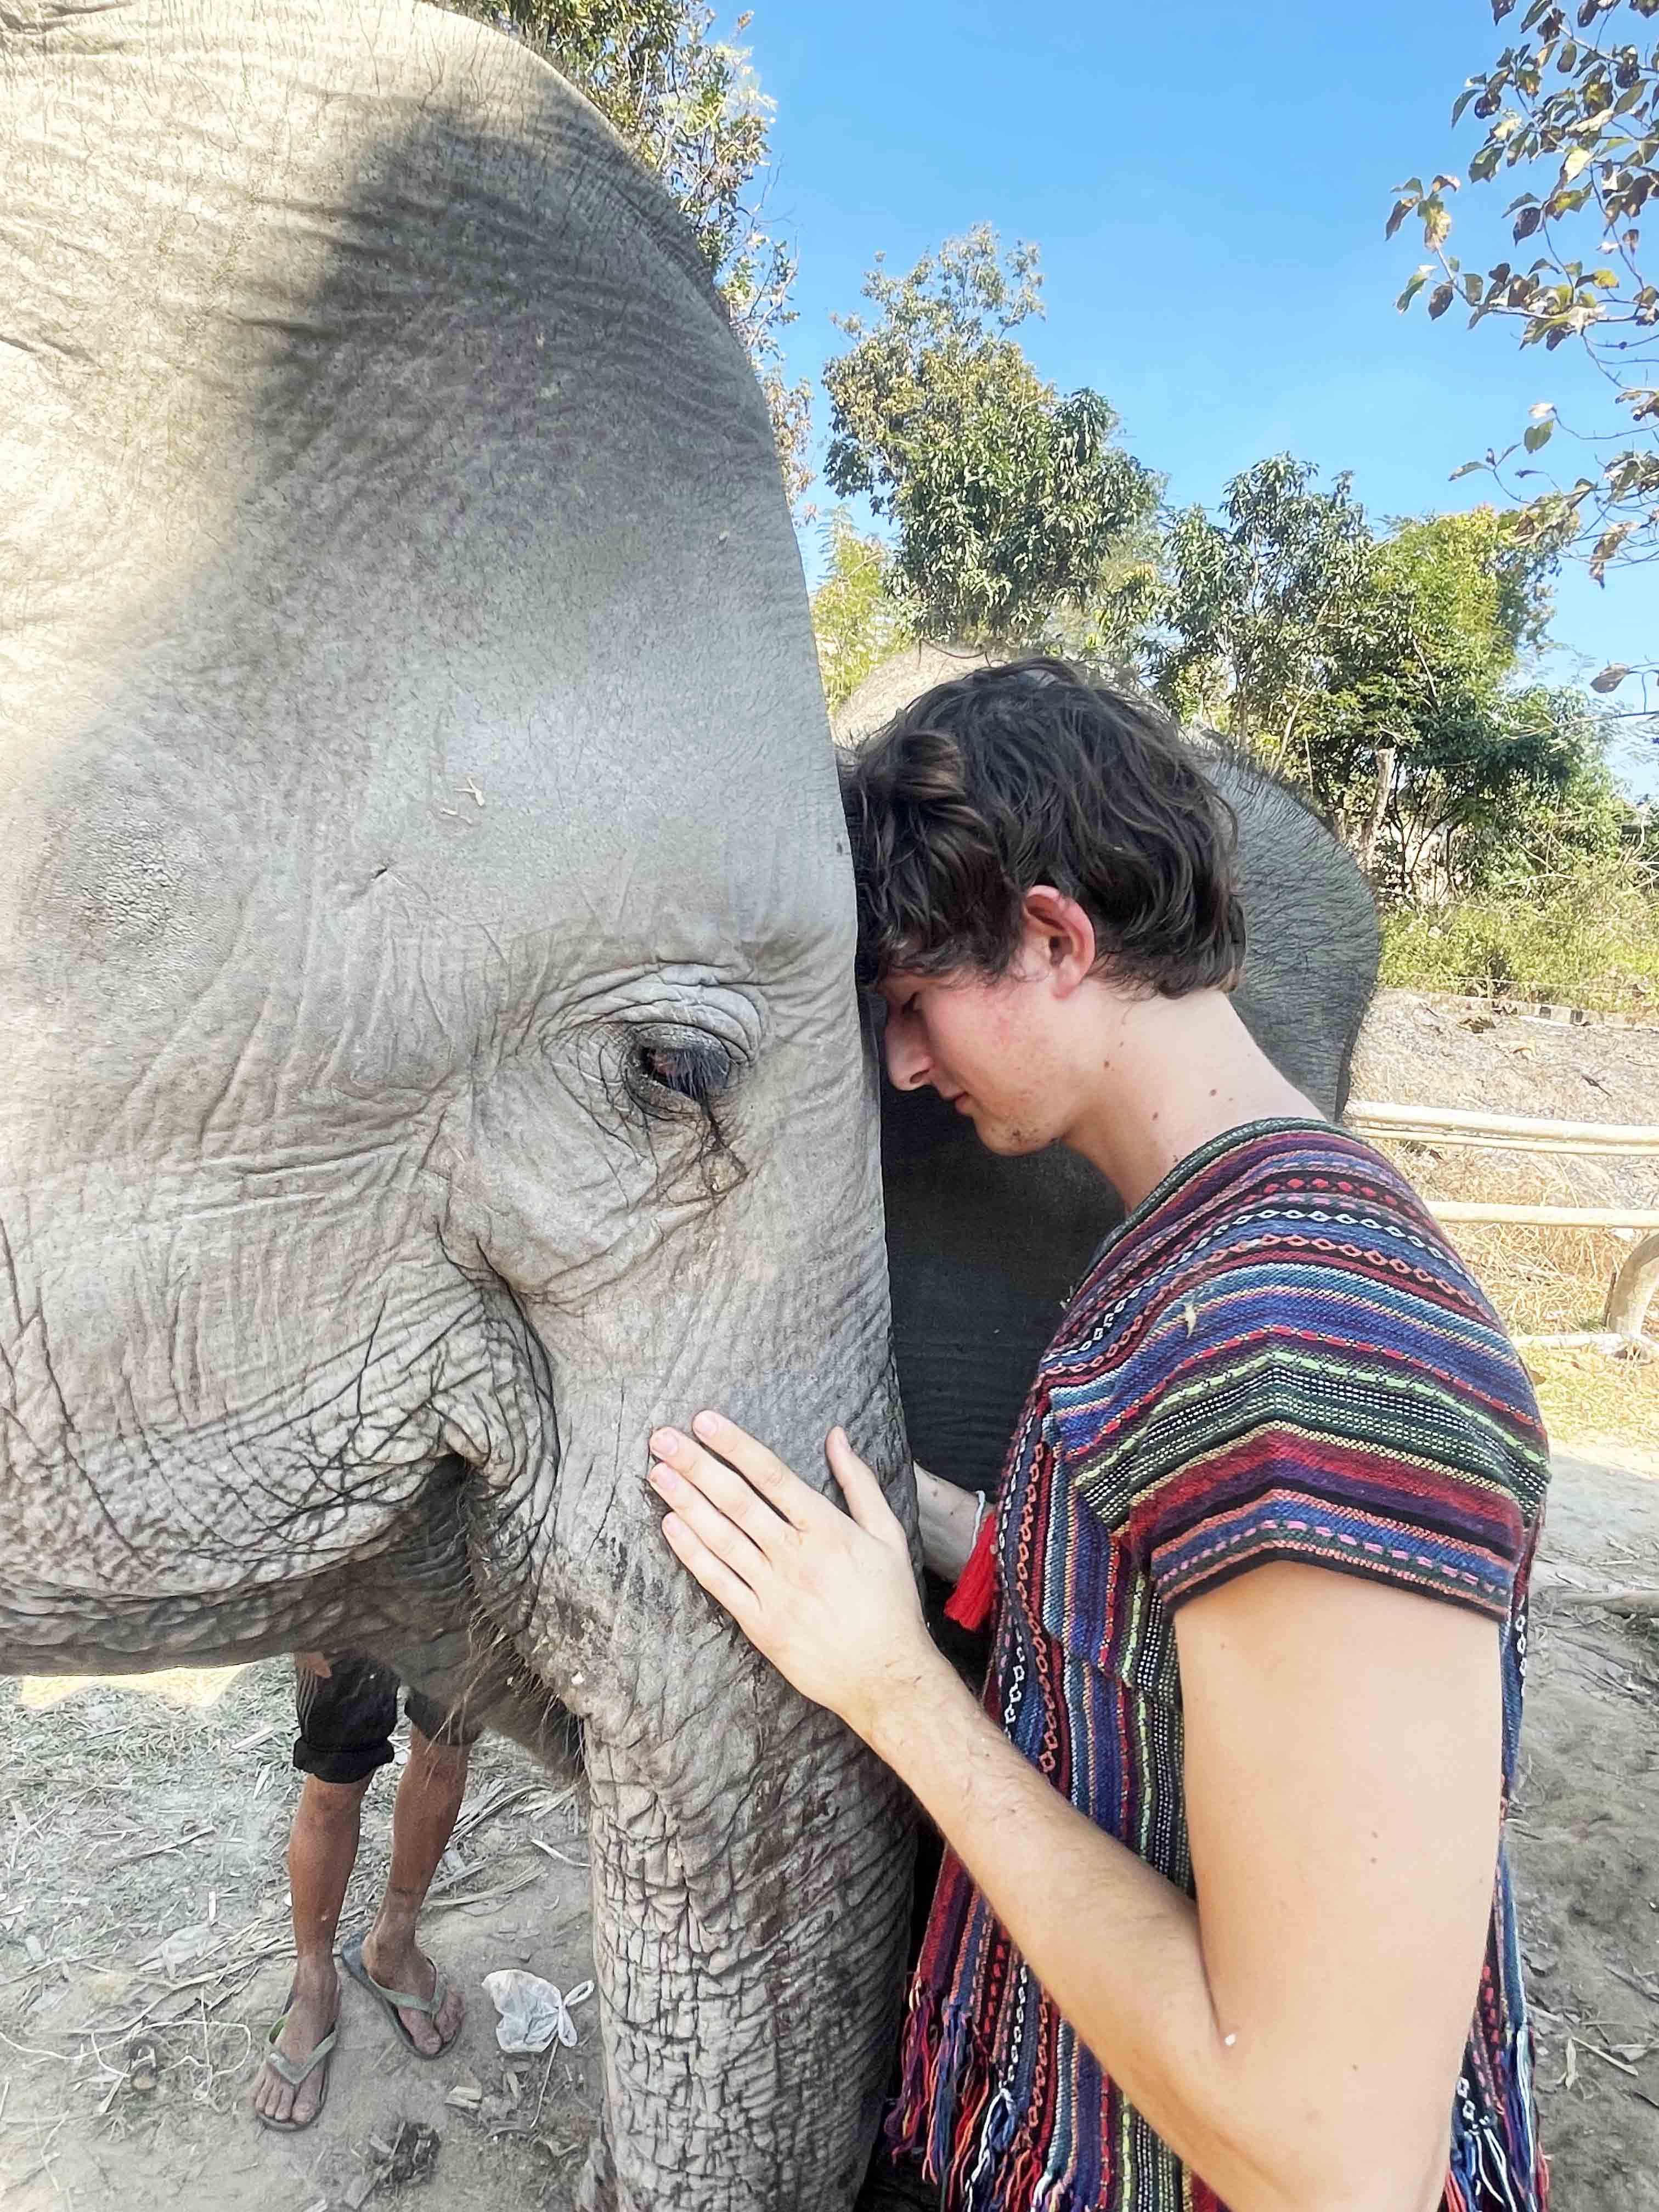 Student having a moment of peace with an elephant in Thailand.